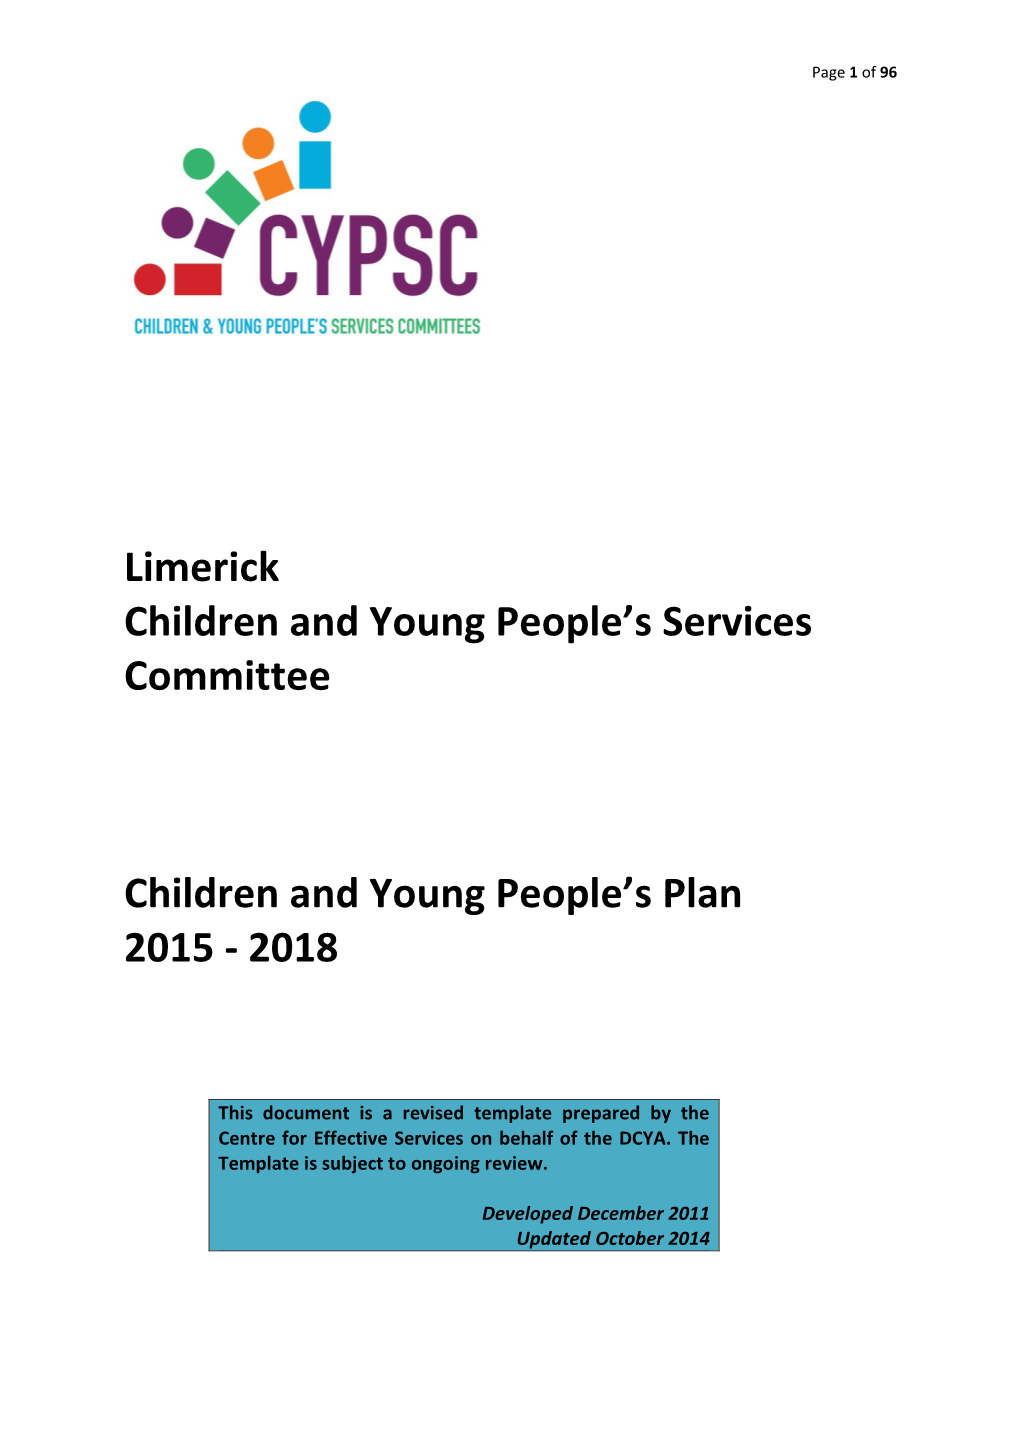 Limerick CYPSC Children and Young People's Plan 2015-2018